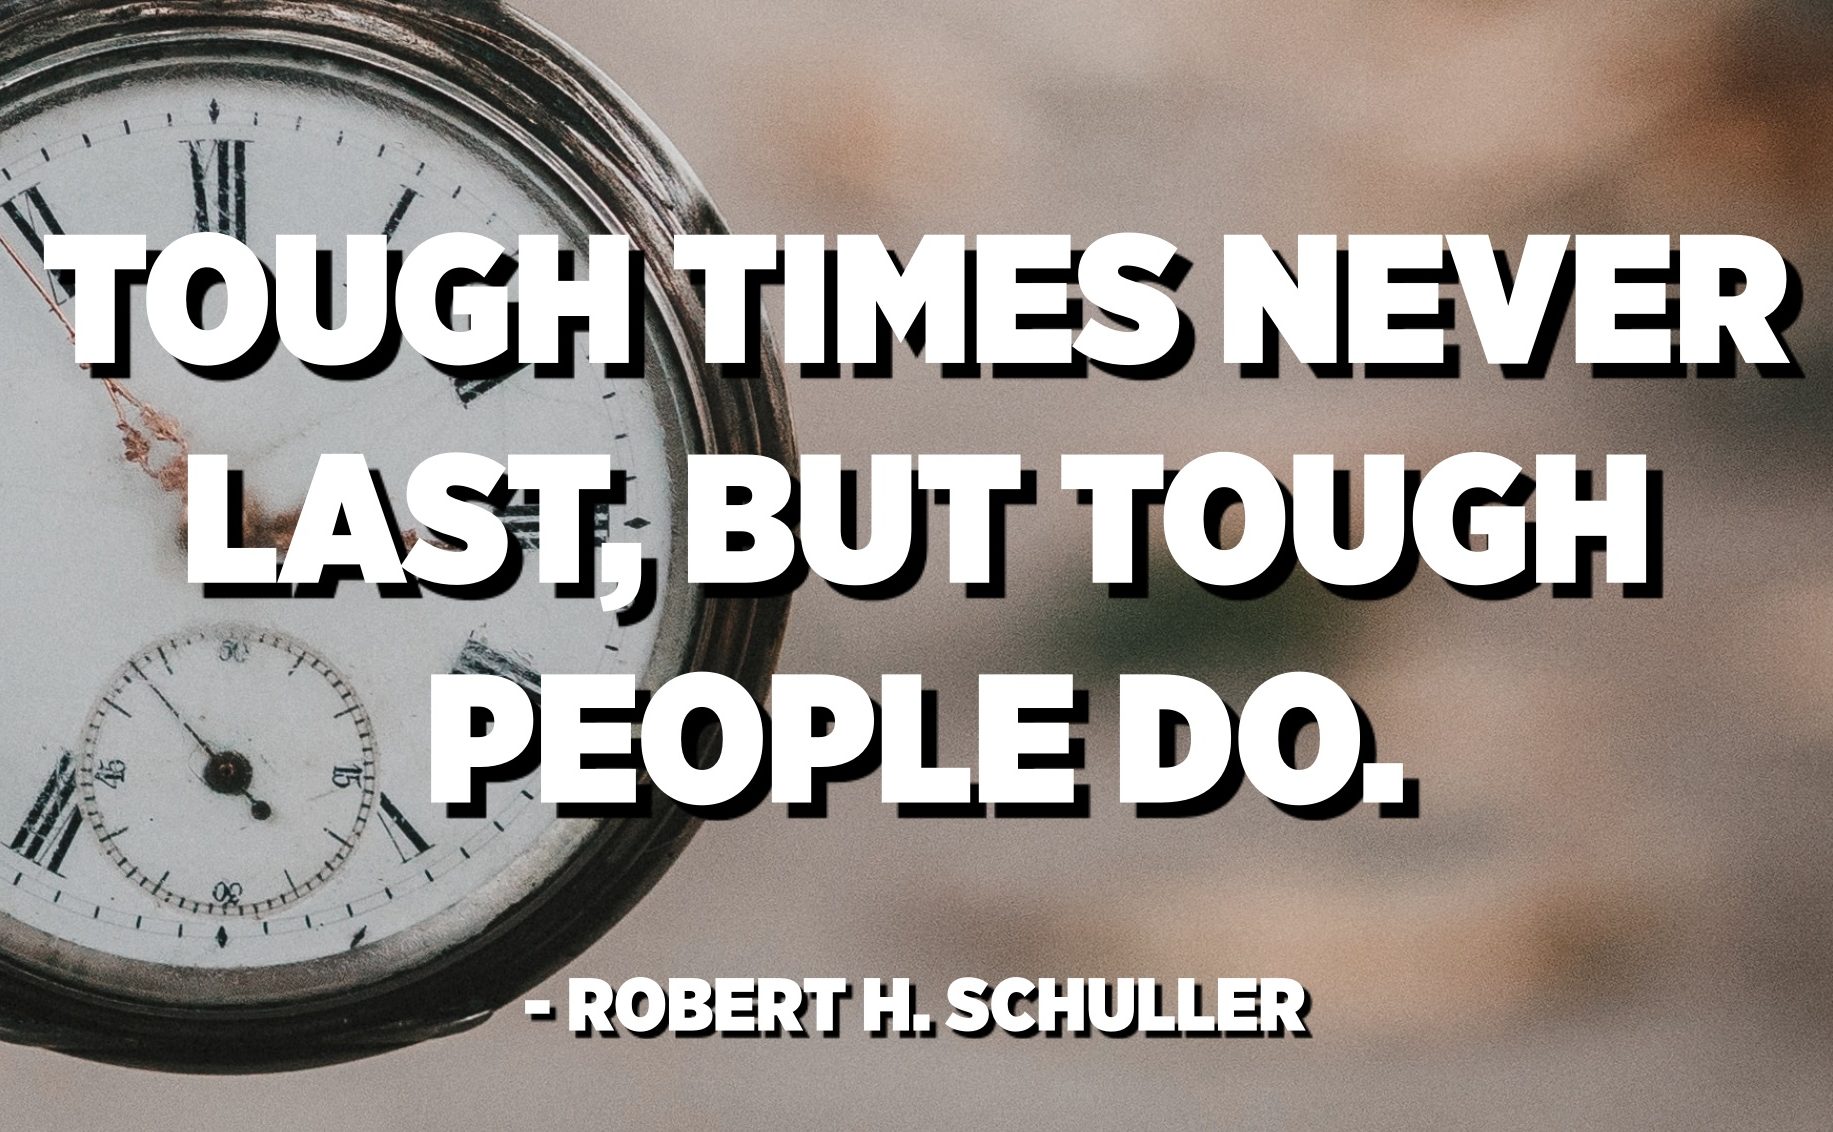 Robert schuller Book in PDF- Tough Times Never Last but Tough People Do